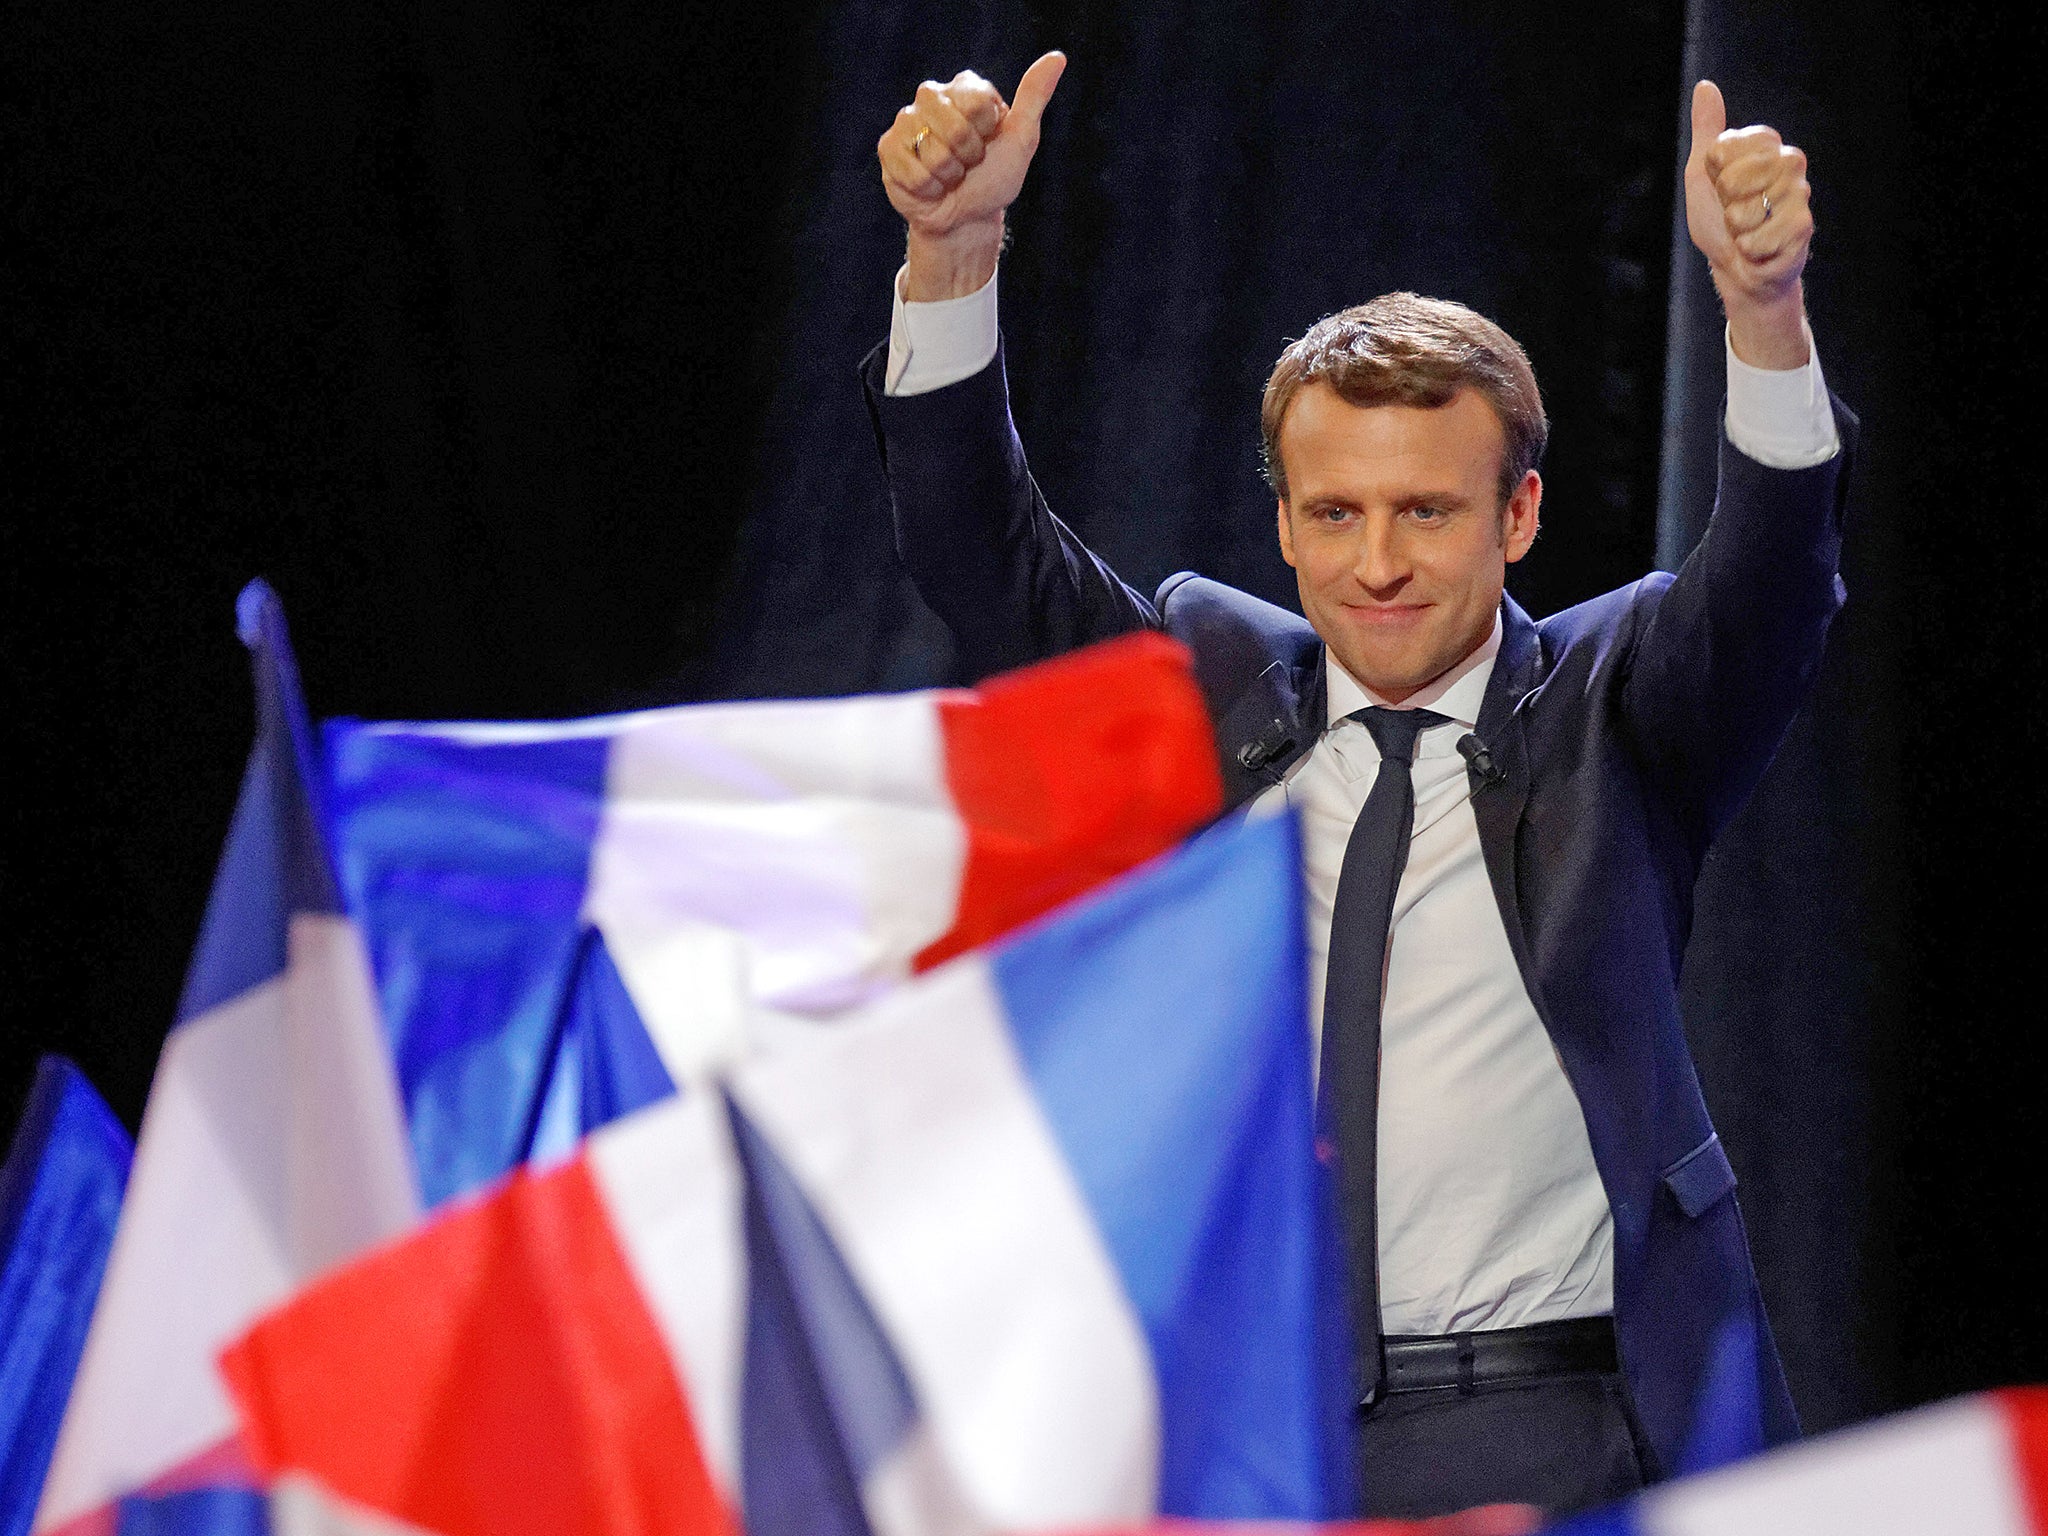 Mr Macron claimed 23.8 per cent of votes in the first round